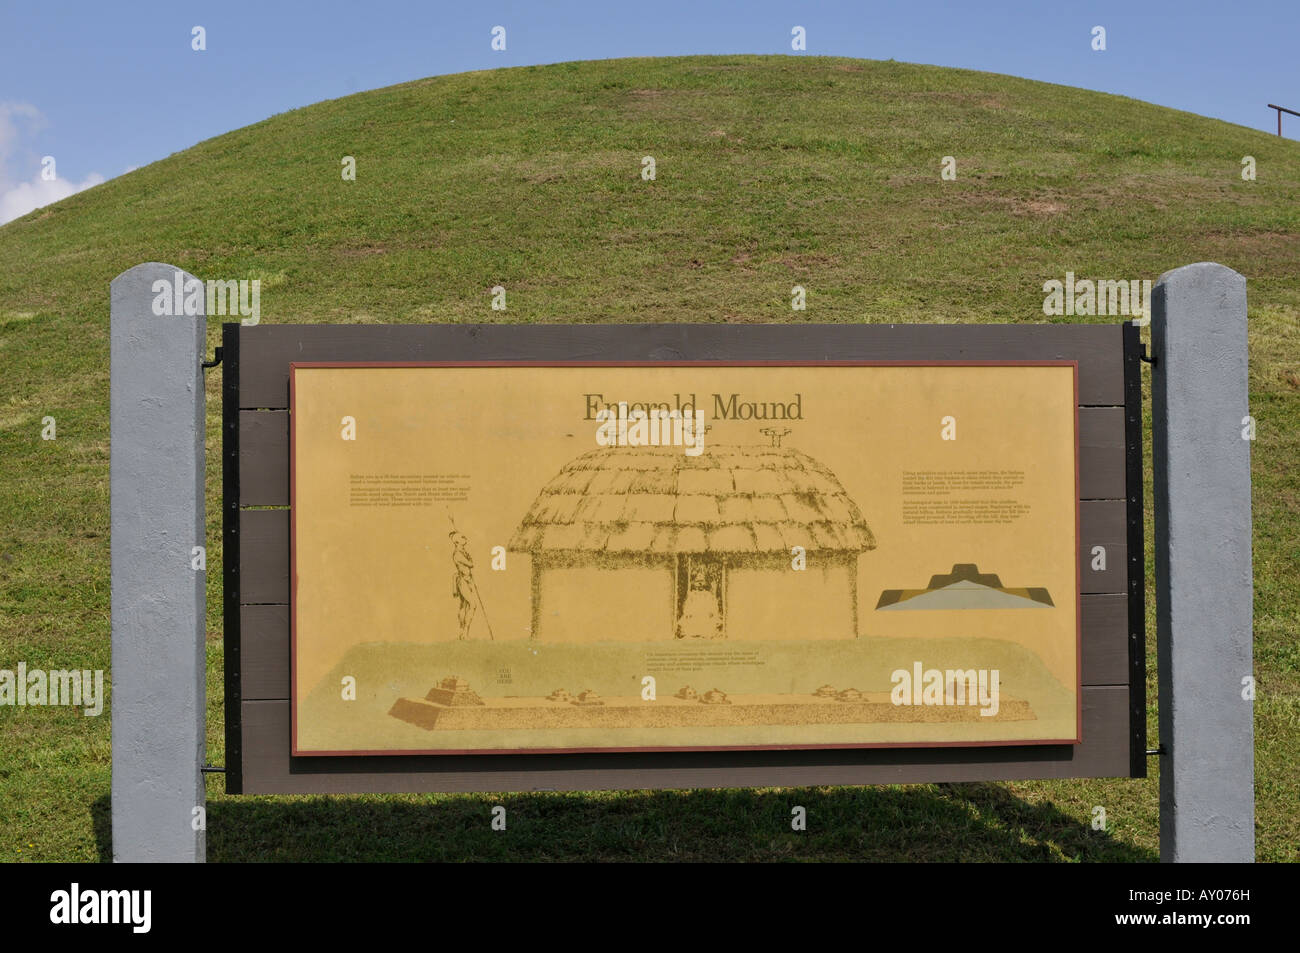 The second largest indian monund in the United States located in Mississippi. Stock Photo